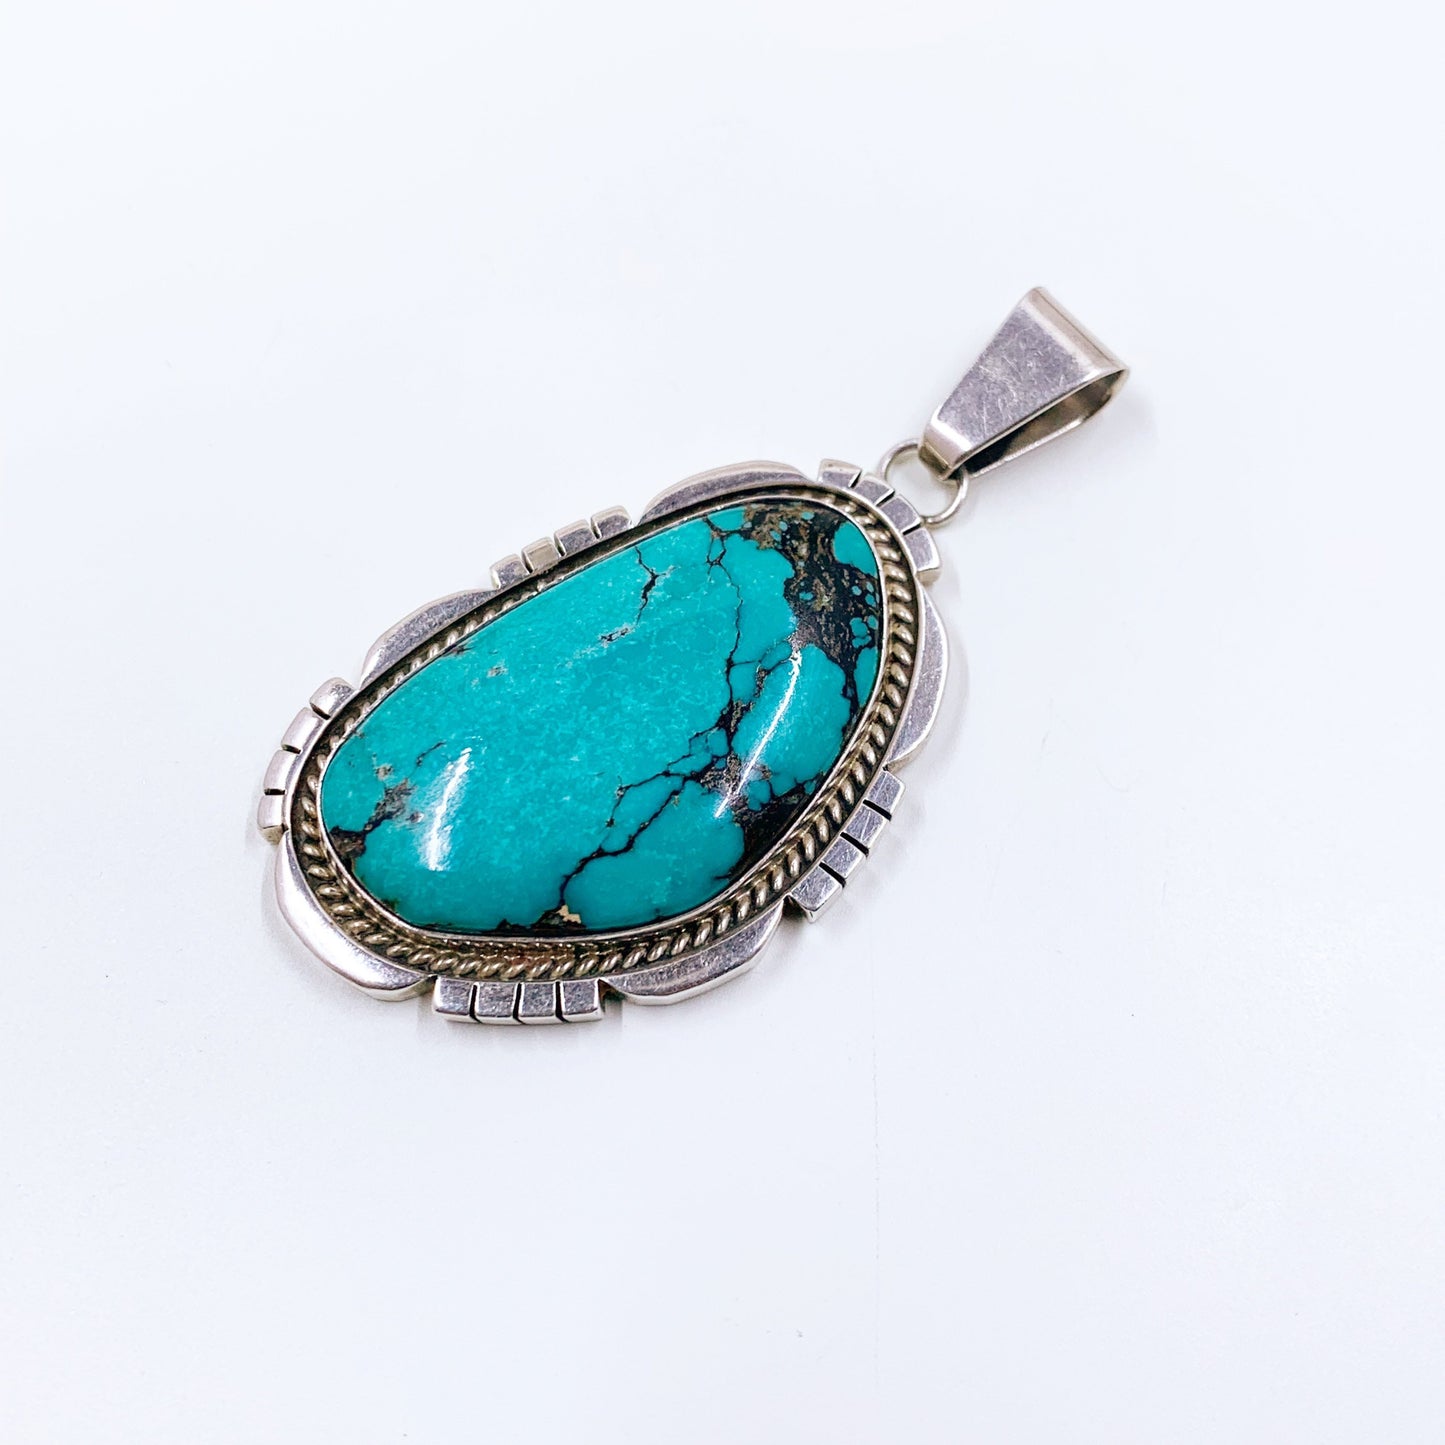 Vintage Navajo Turquoise Pendant by Darrin Livingston  | Large Silver Turquoise Stone Pendant